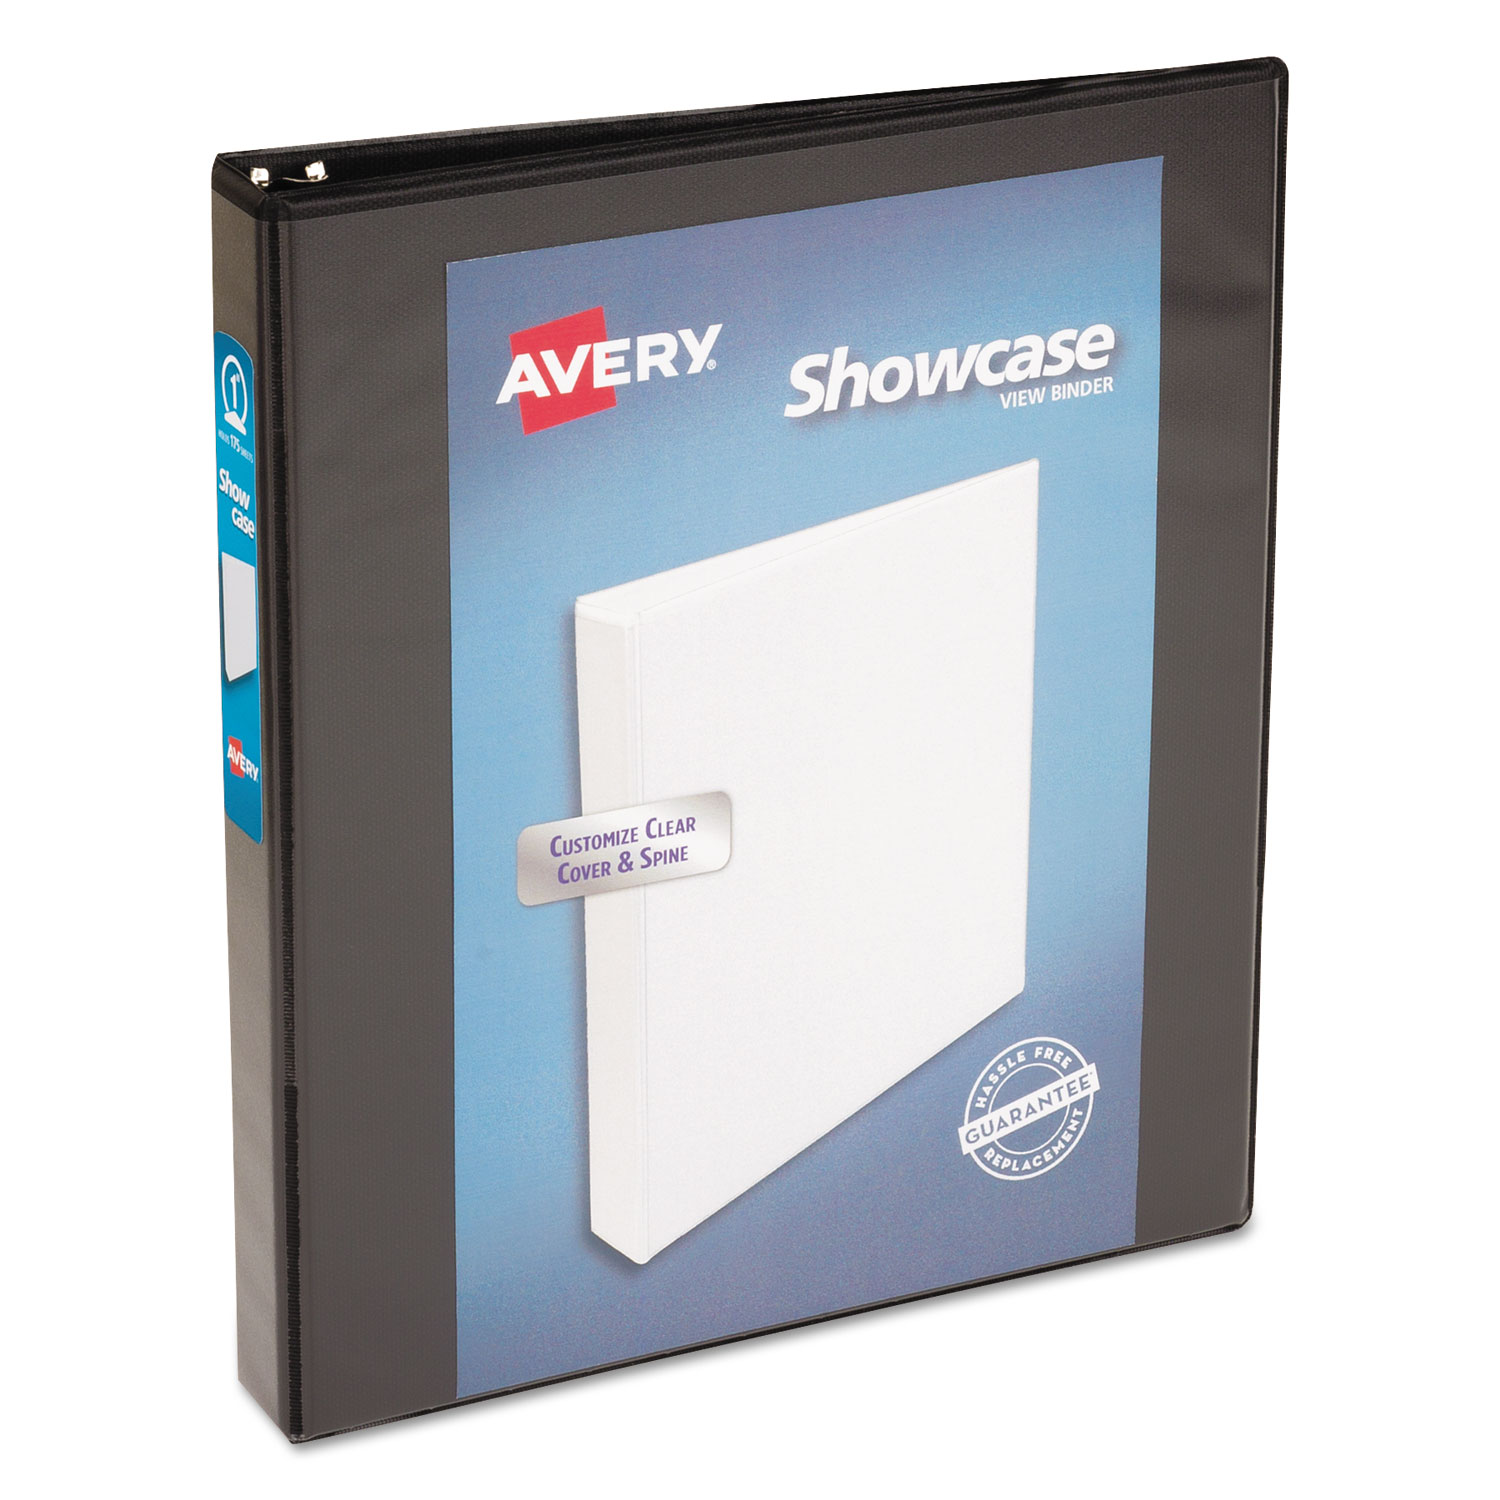  Avery 19600 Showcase Economy View Binder with Round Rings, 3 Rings, 1 Capacity, 11 x 8.5, Black (AVE19600) 